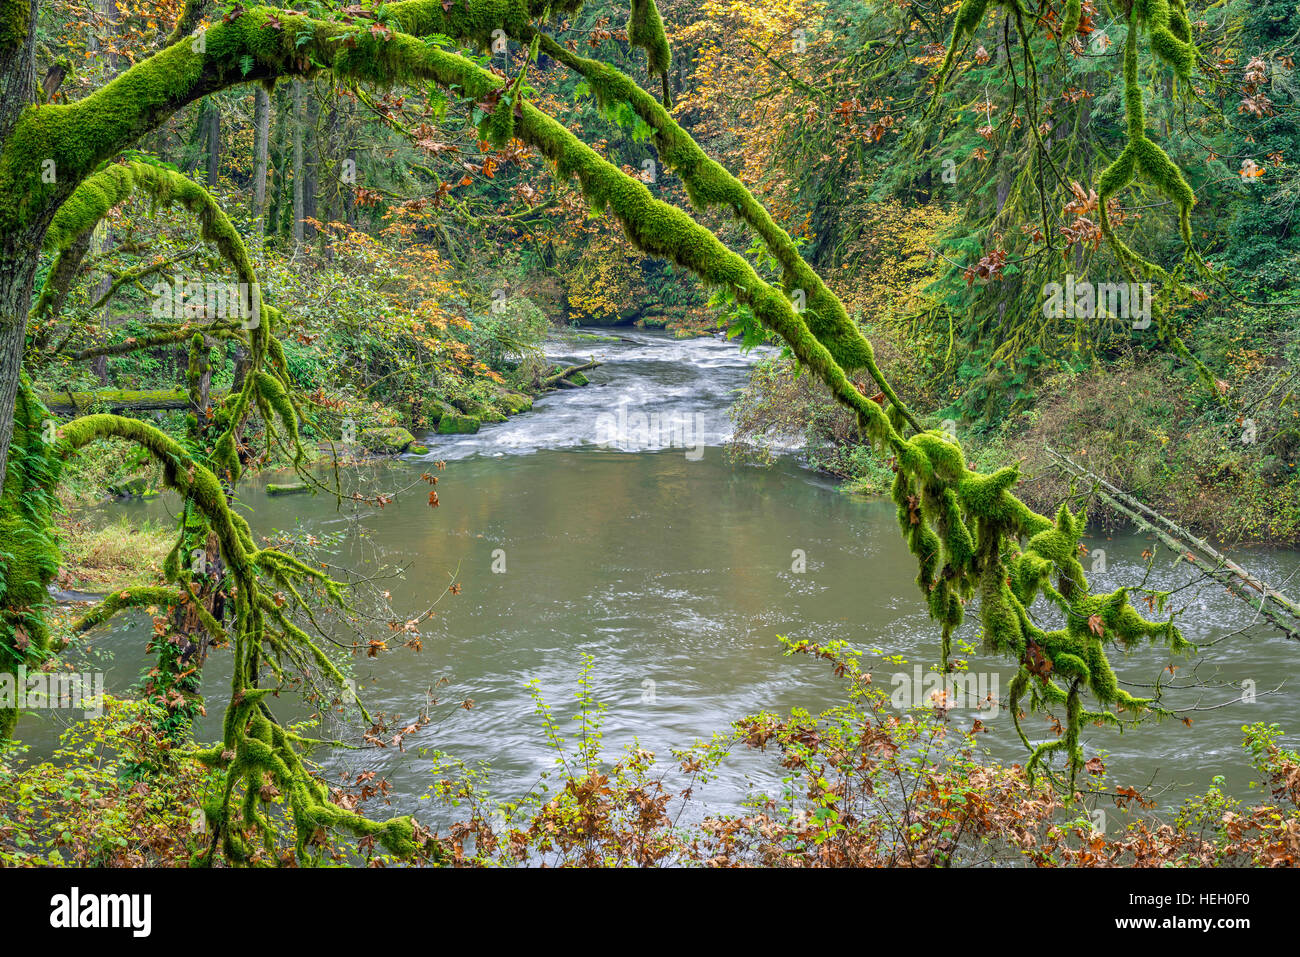 USA, Washington, Camas, Lacamas Park, Moss-covered branches of bigleaf maple stand out in autumn forest above Lacamas Creek. Stock Photo